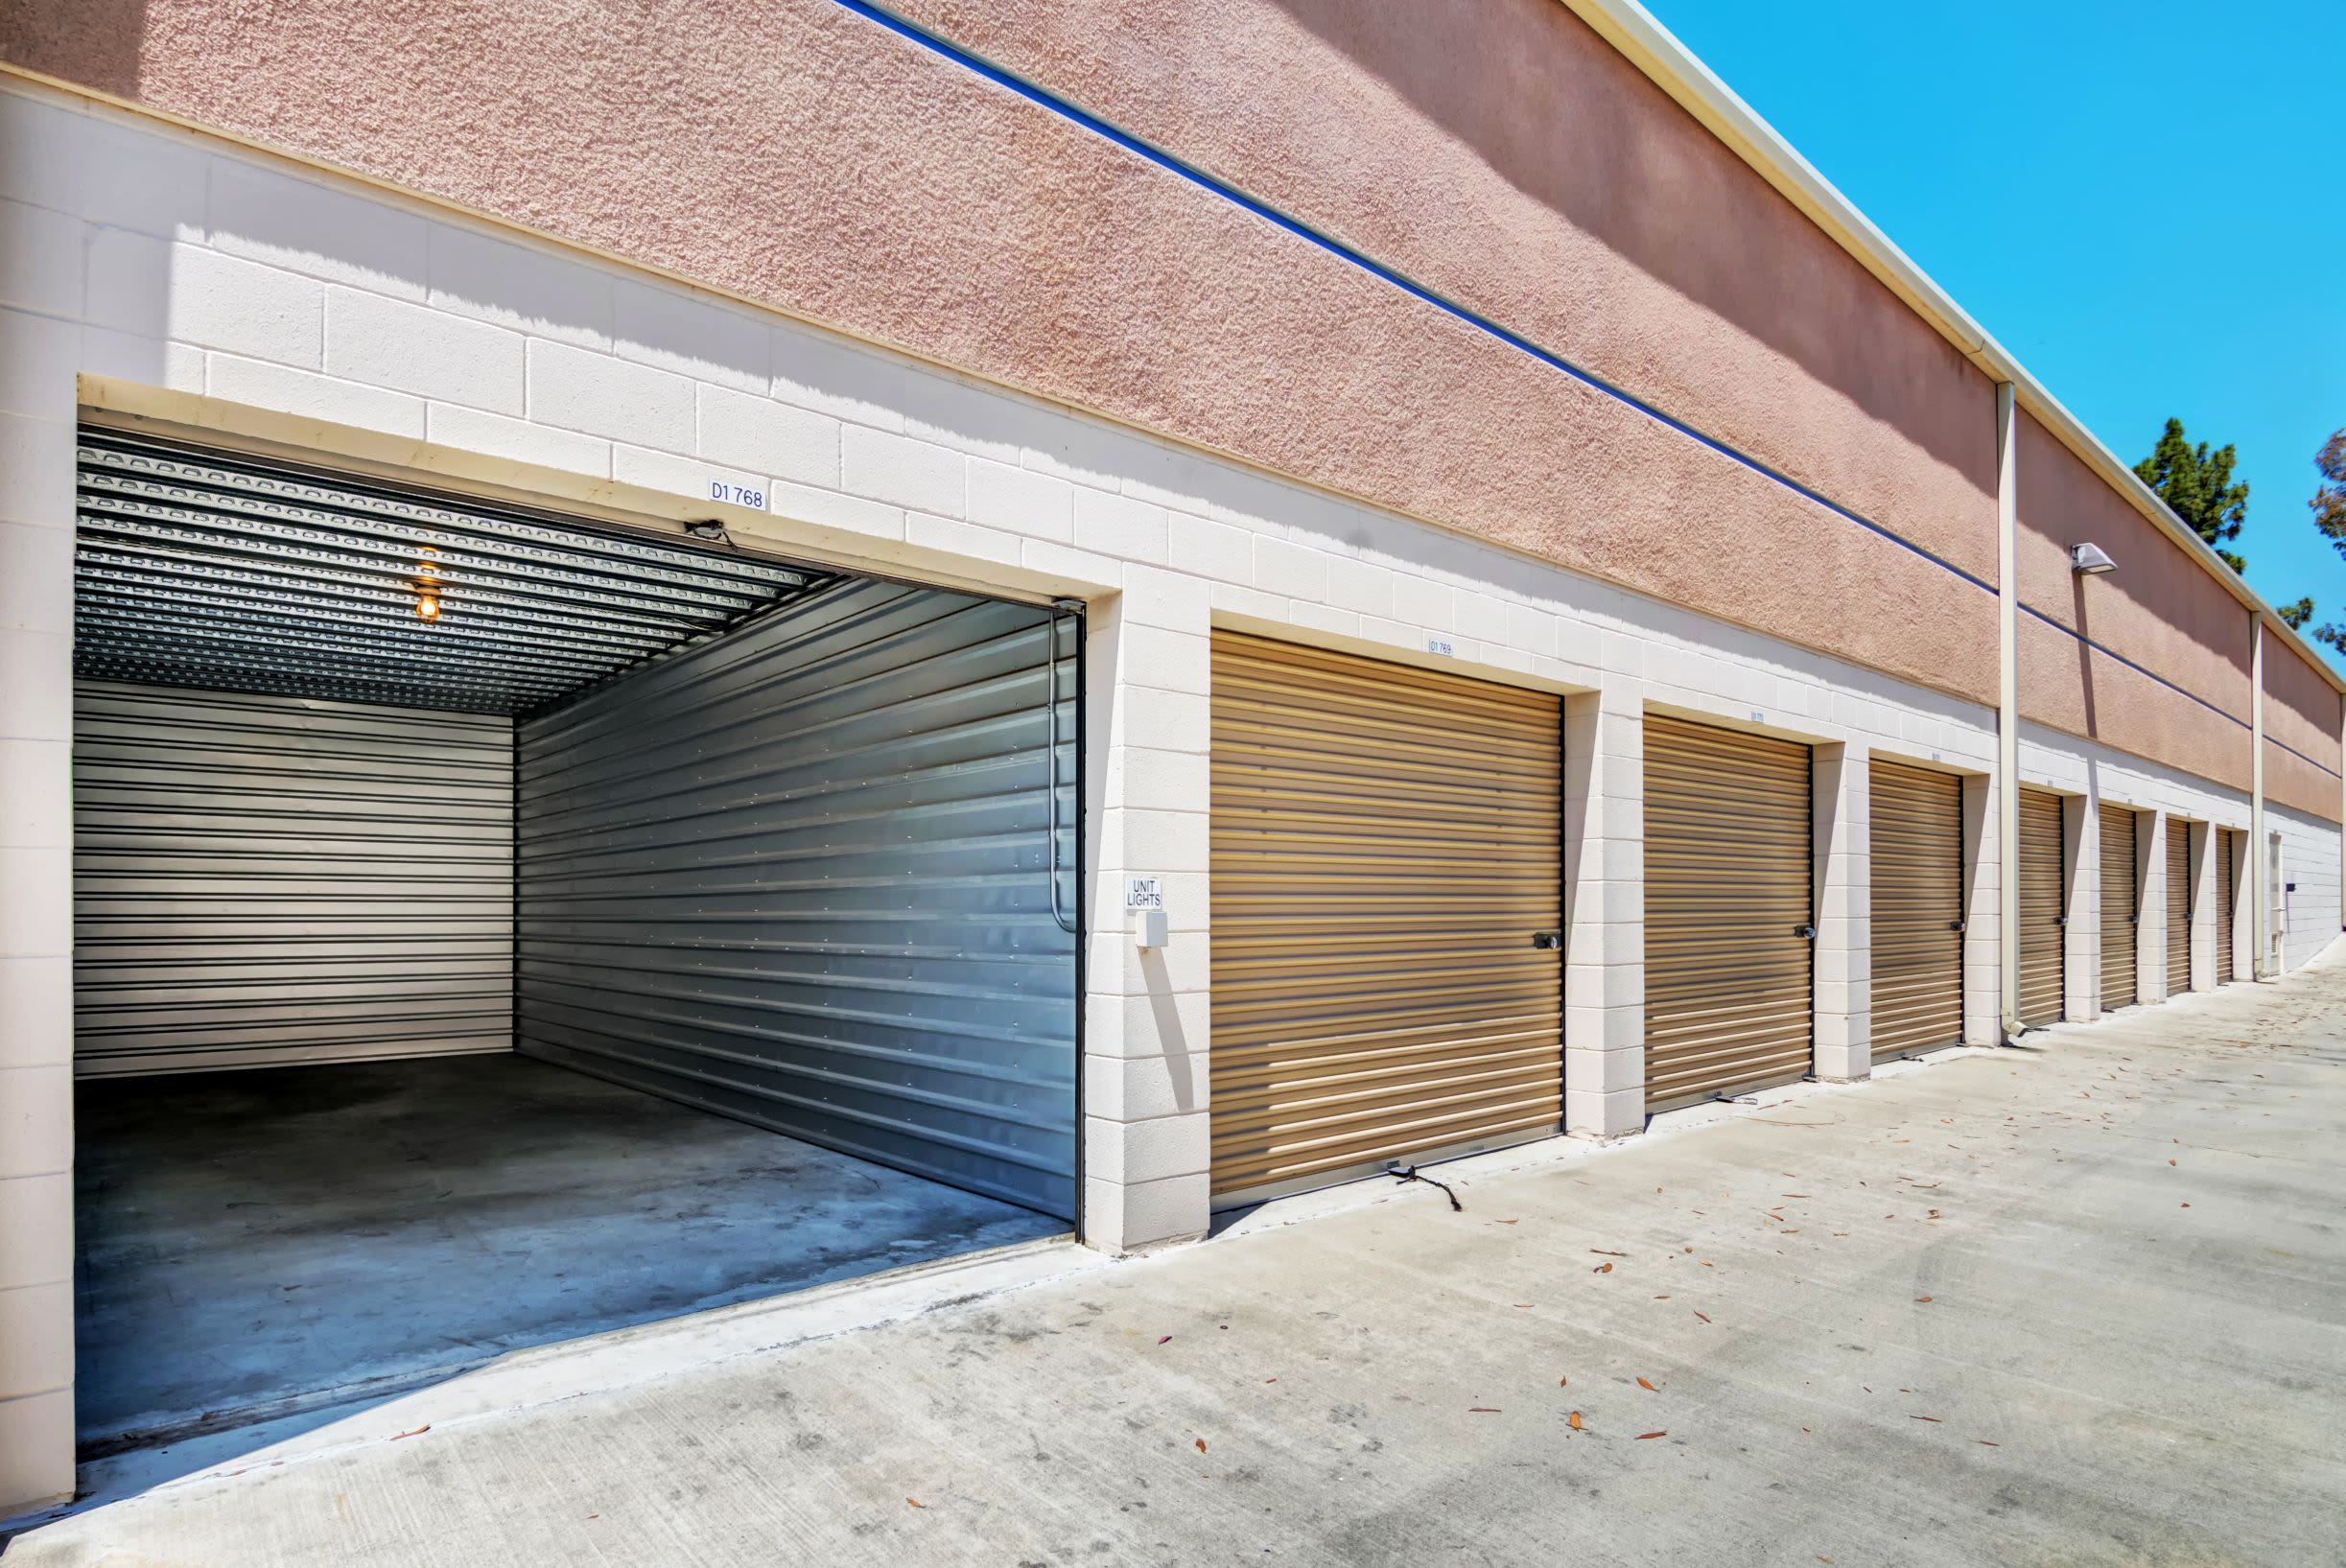 A row of exterior units at Smart Self Storage of Eastlake in Chula Vista, CA